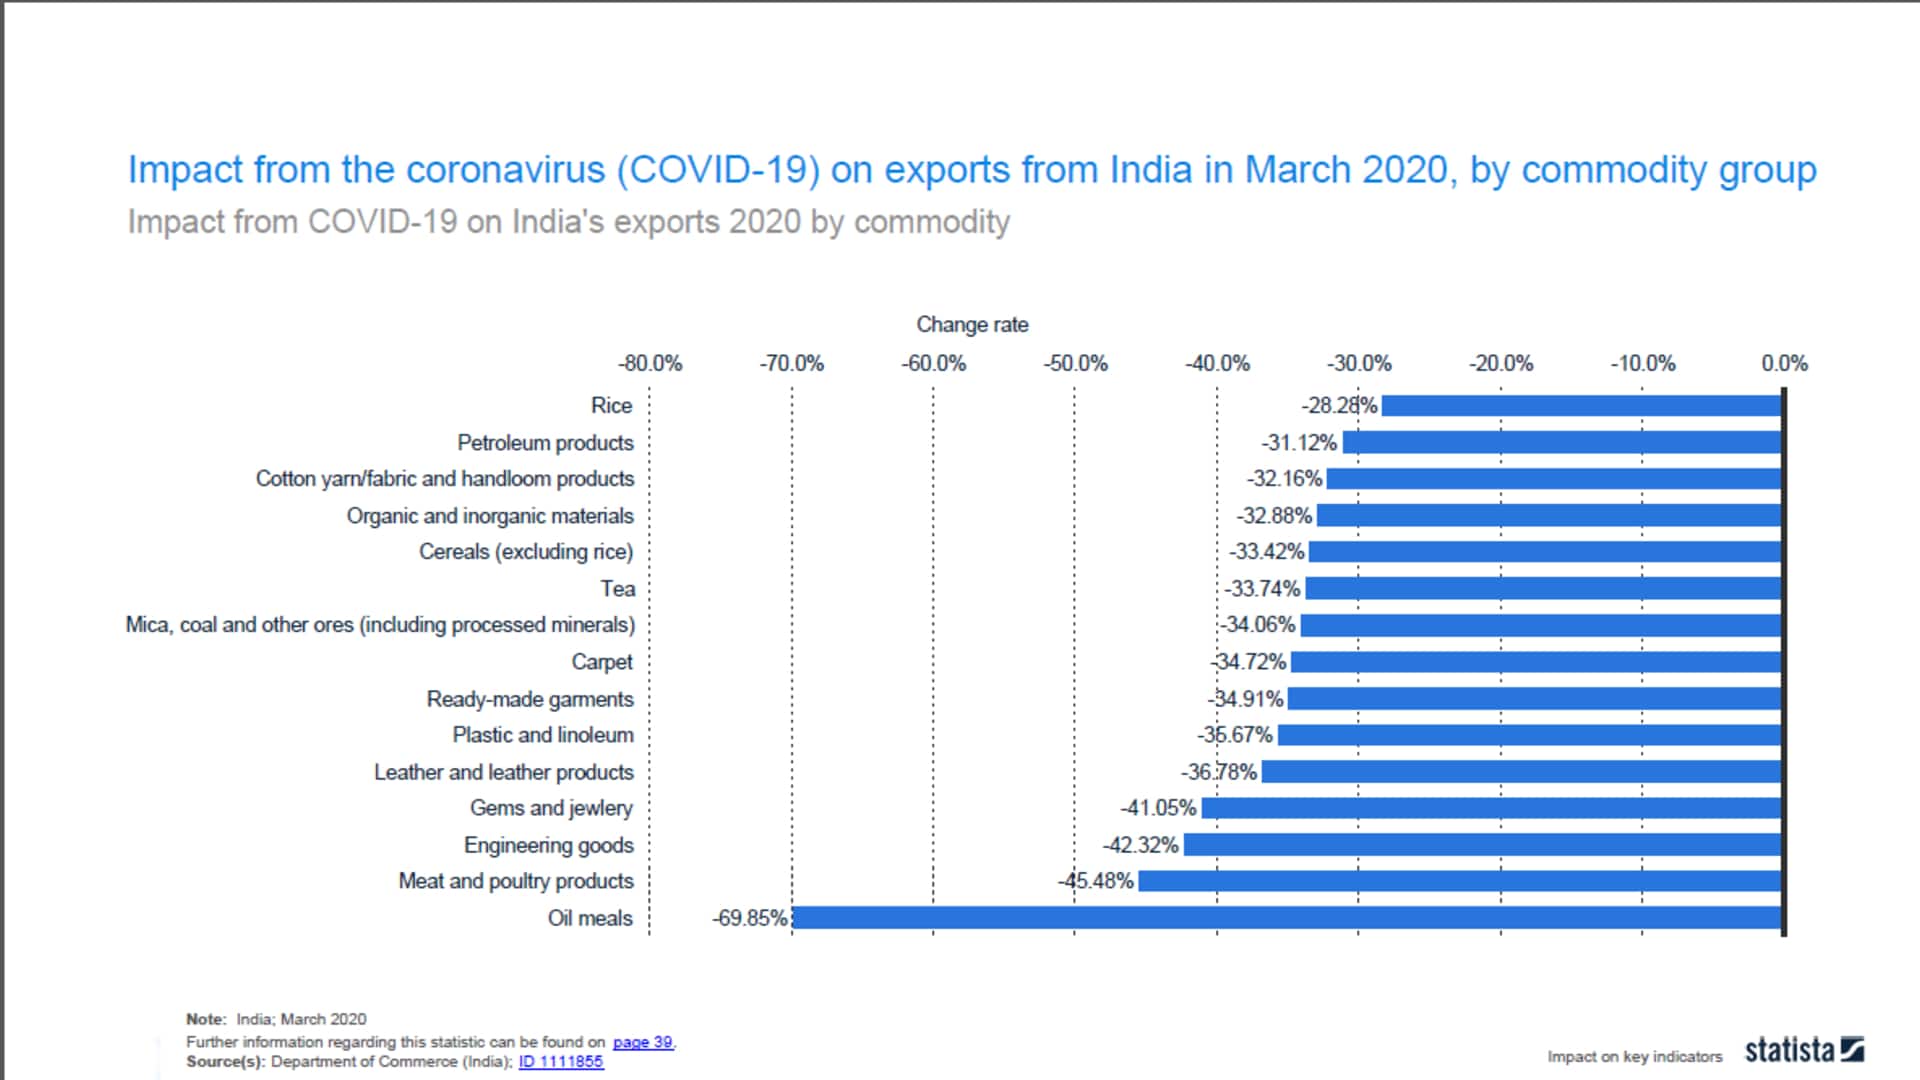 Impact from the coronavirus (COVID-19) on exports from India in March, by commodity group: Tea exports from India was the least affected with a decline of over 33 in March 2020, compared to the same month in the previous year. Engineering goods, meat and poultry products along with oil meals took the steepest hit ranging between losses of 42 and 70 percent that month. The country went into lockdown on March 25, 2020, the largest in the world, restricting 1.3 billion people, extended until May 3, 2020. (Graph: CRISIL)